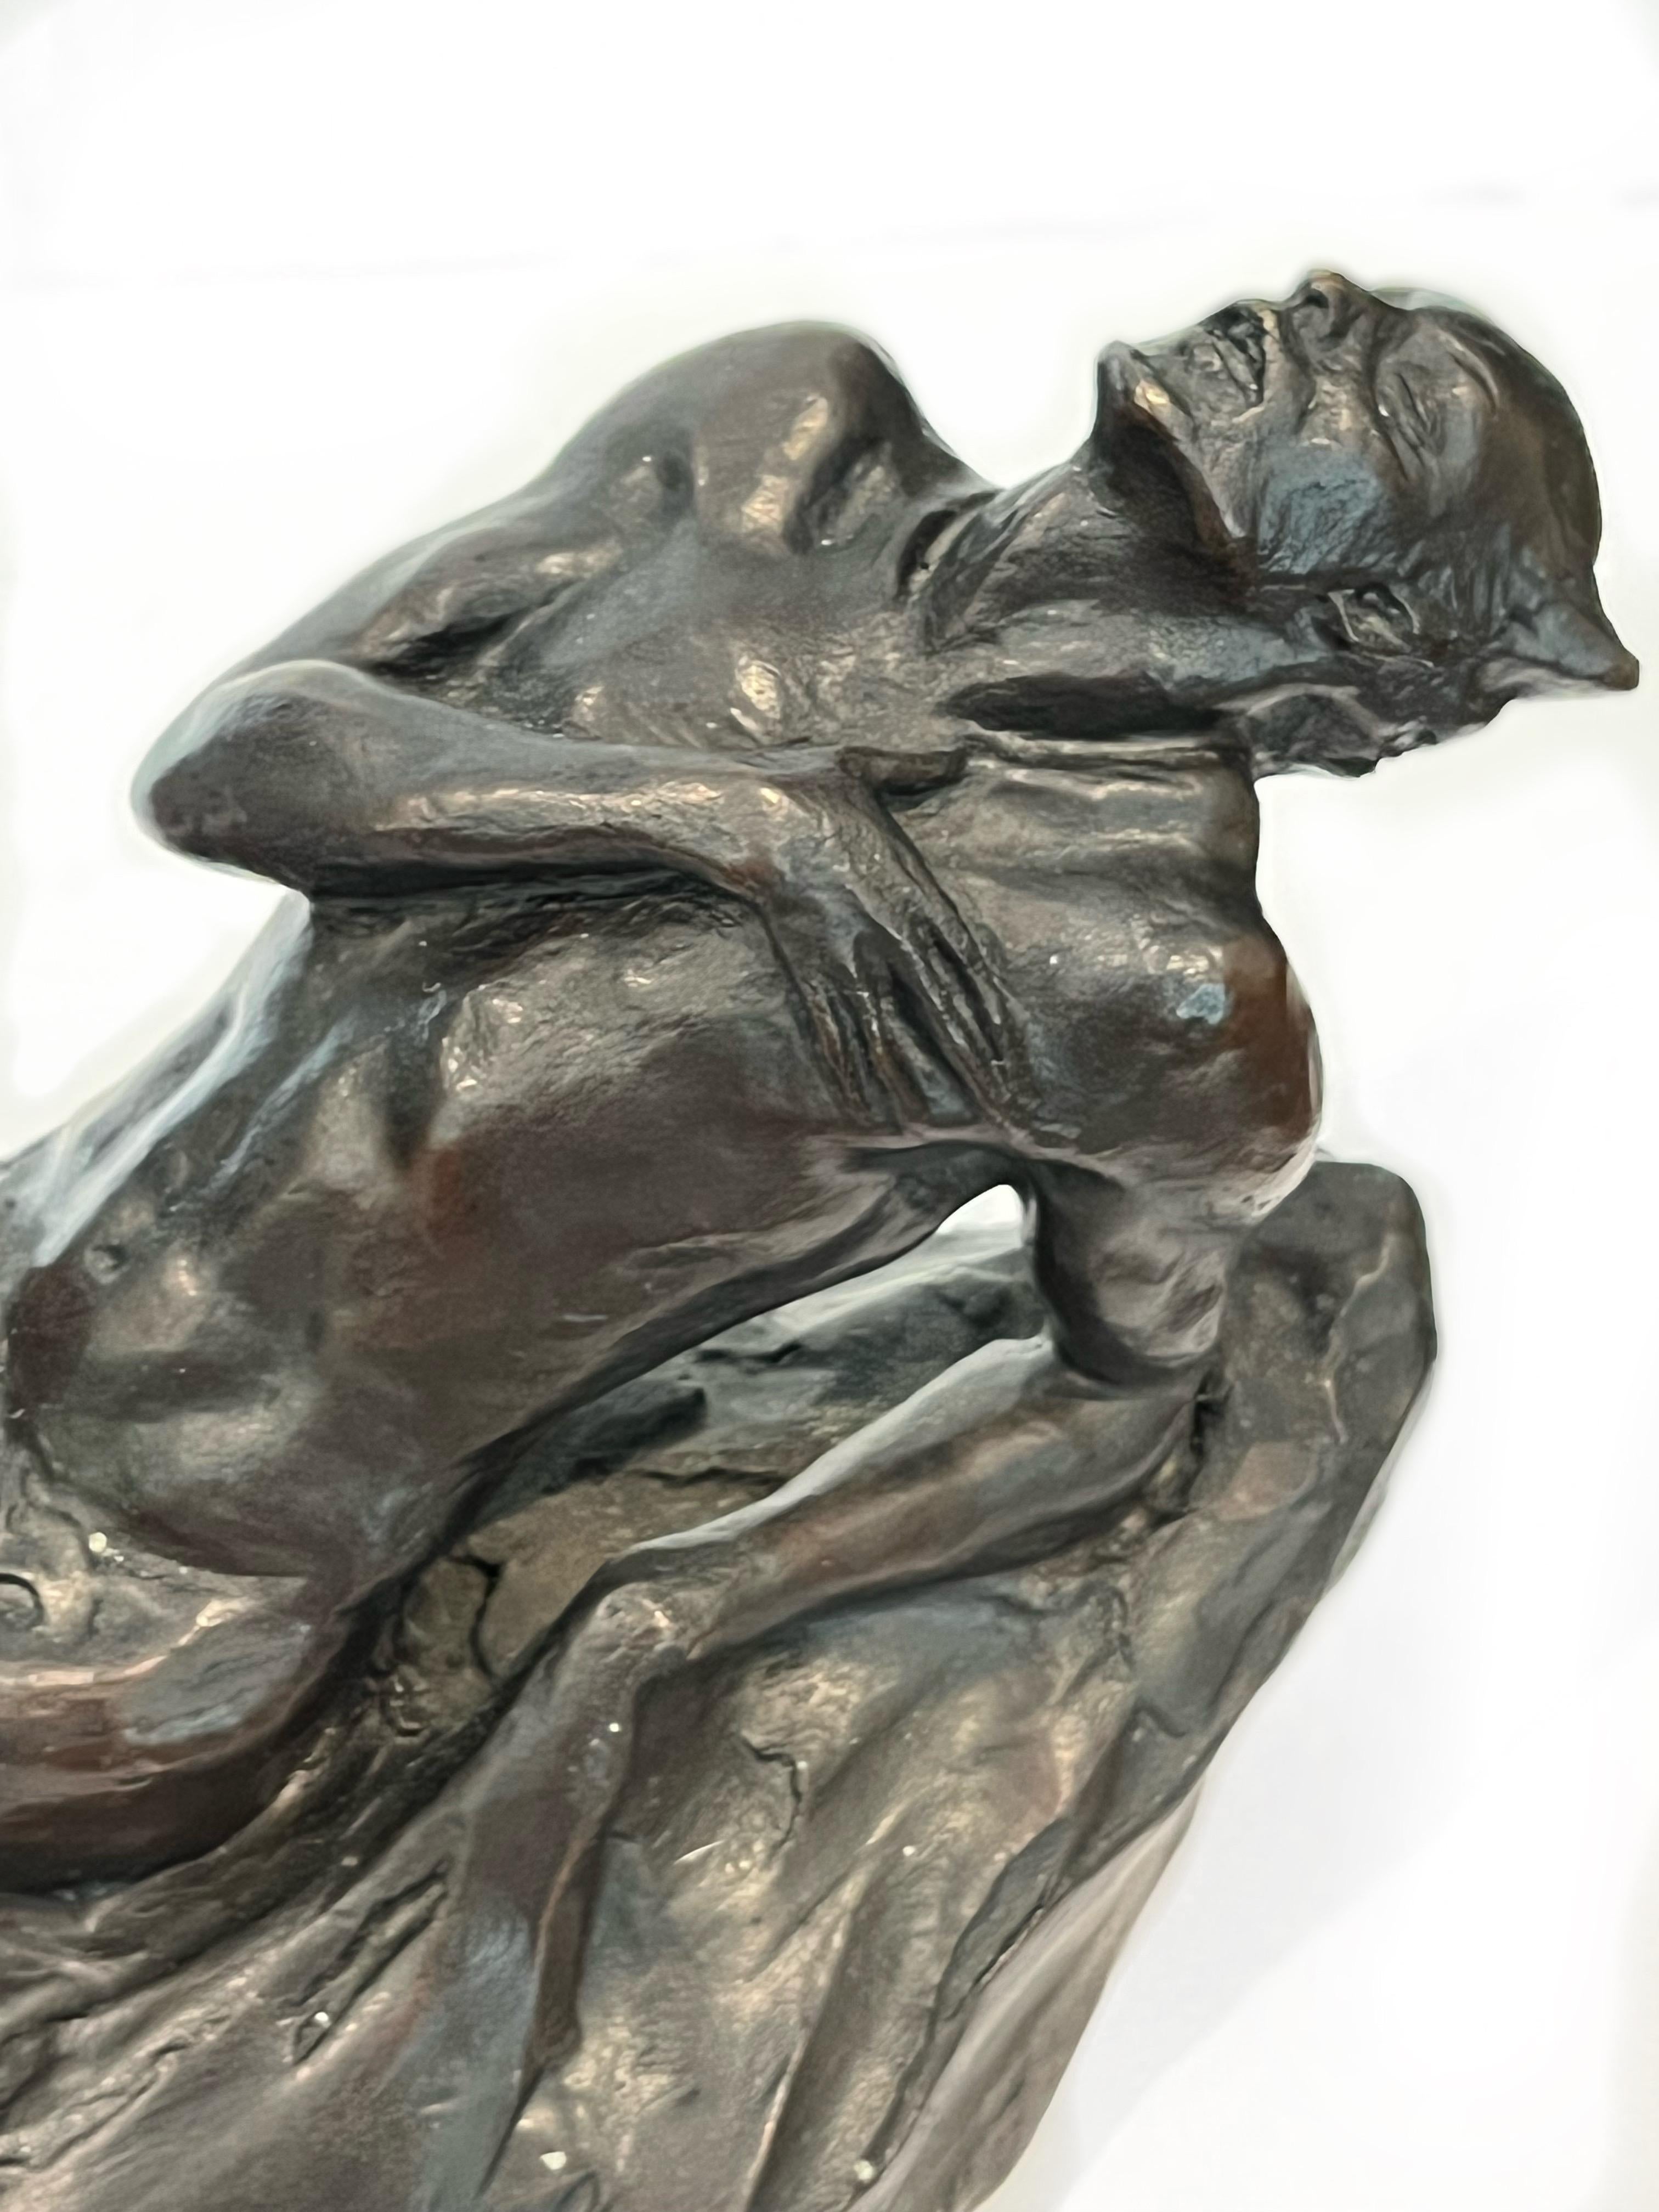 Nijinski Dance Ballet Russes American French Woman Sculptor early 20th Century , Bronze 
12 1/2 “ x 6 1/4” H x 6” W

Sculpted c. 1912 while Hoffman with studying with Rodin. In 1912 she won First Prize the Paris Salon for her new modern way of